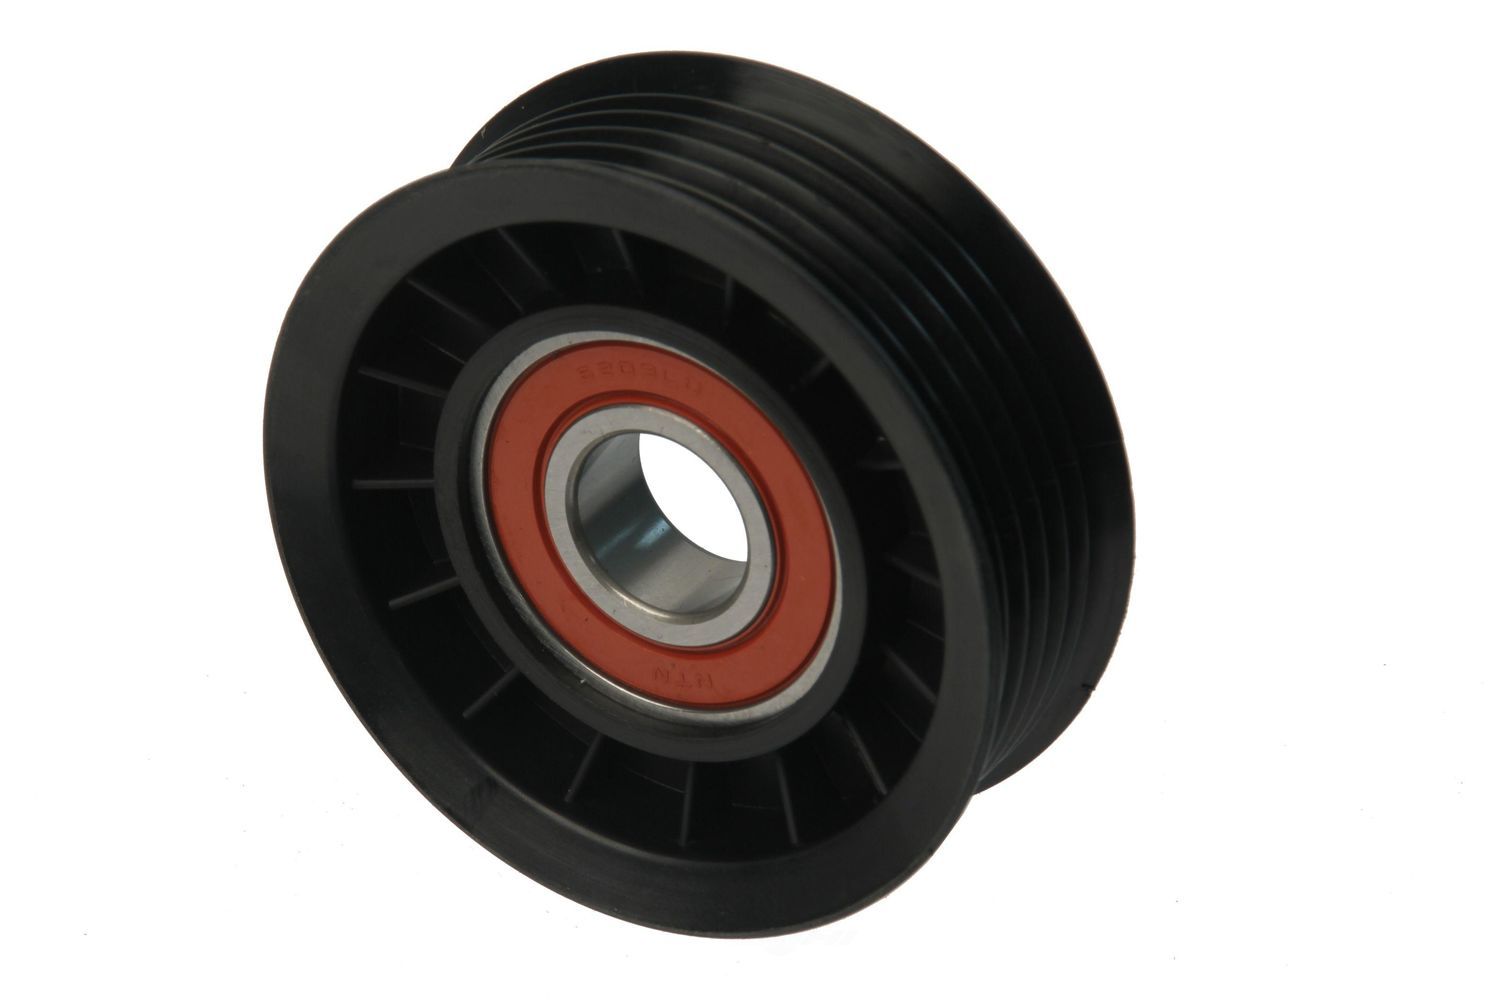 AUTOTECNICA - Accessory Drive Belt Idler Pulley (Grooved Pulley) - AT5 GM1414487